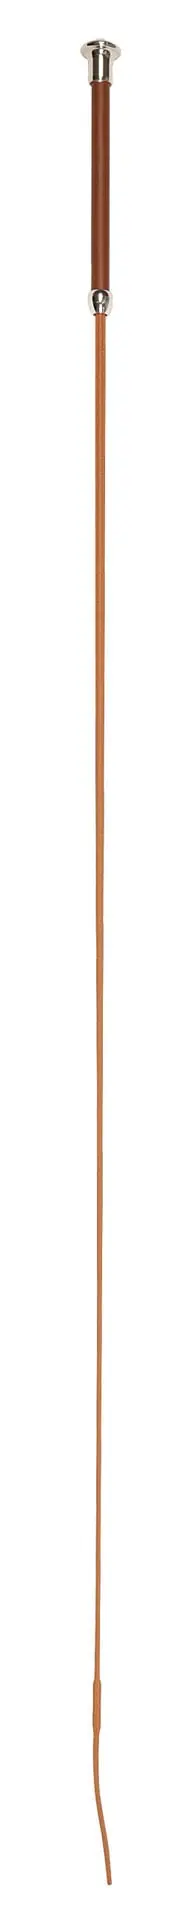 Dressage whip cognac, 120cm with synthetic leather handle